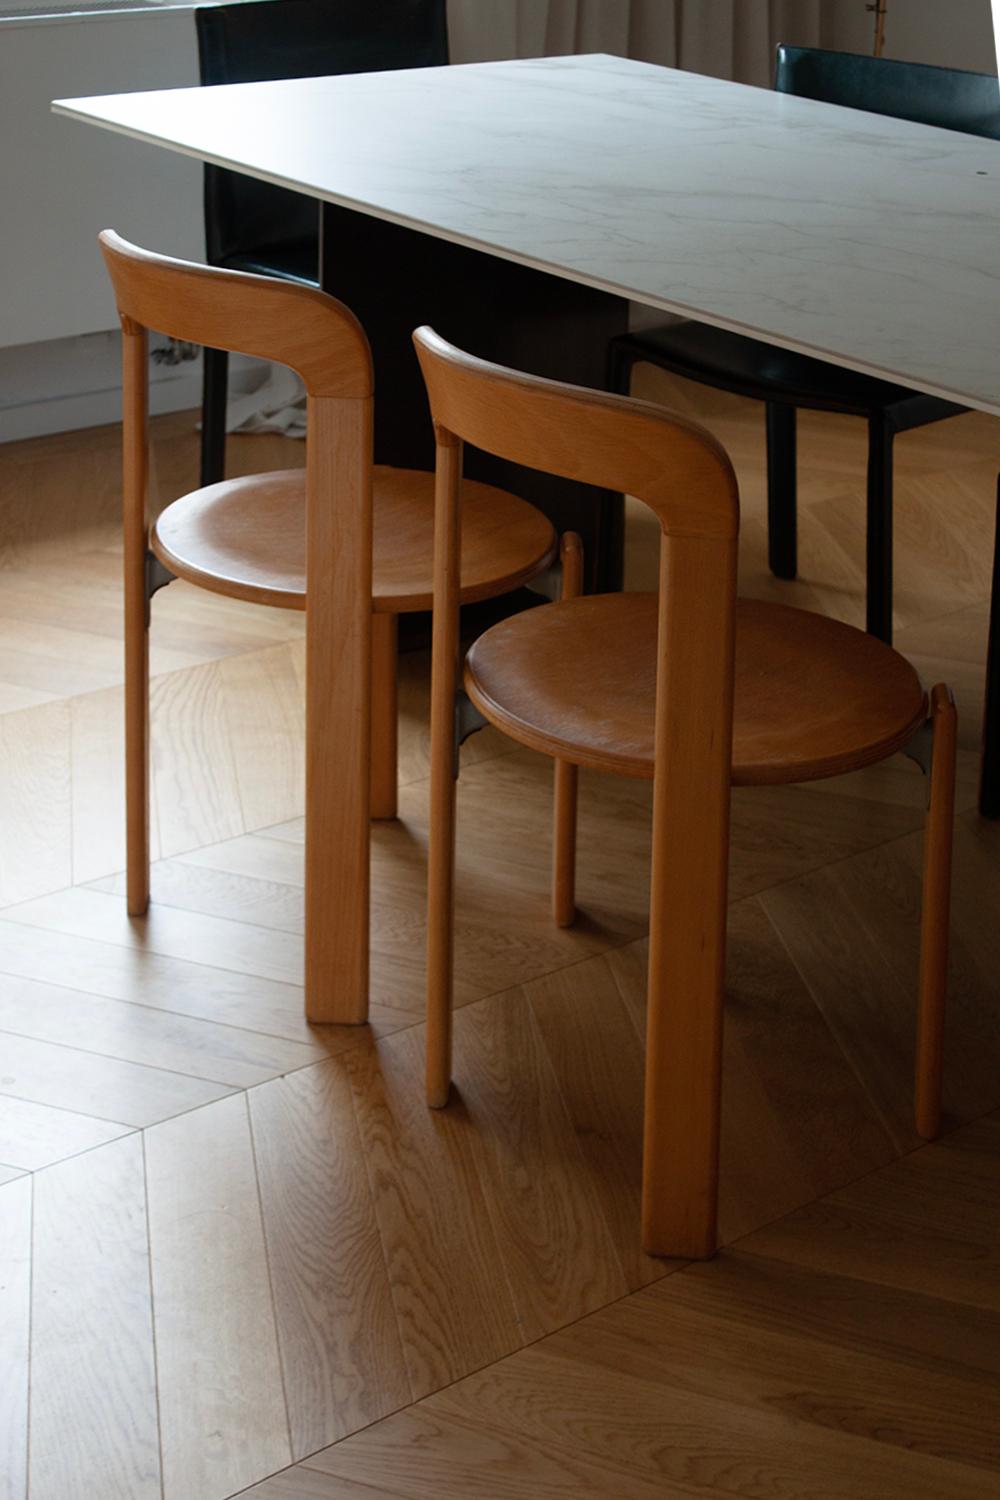 20th Century Two Bruno Rey Chairs in Beech Wood circa 1970 by Dietiker with Original Cushion